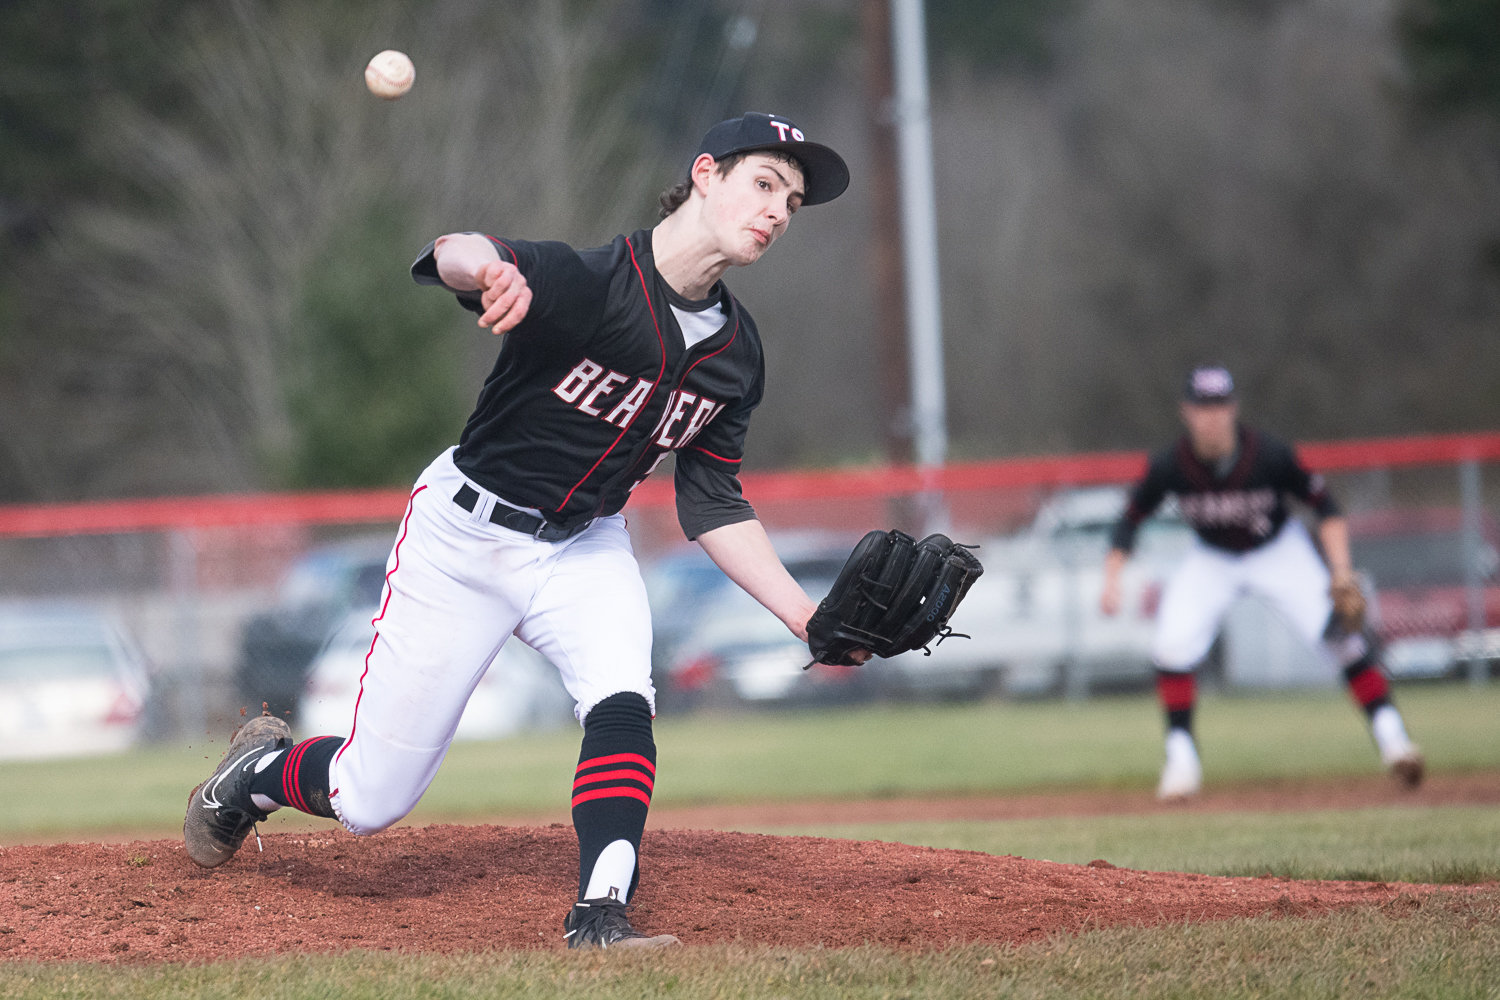 Brody Noonan lets fly from the mound during Tenino's 7-4 win over Black Hills on March 14.